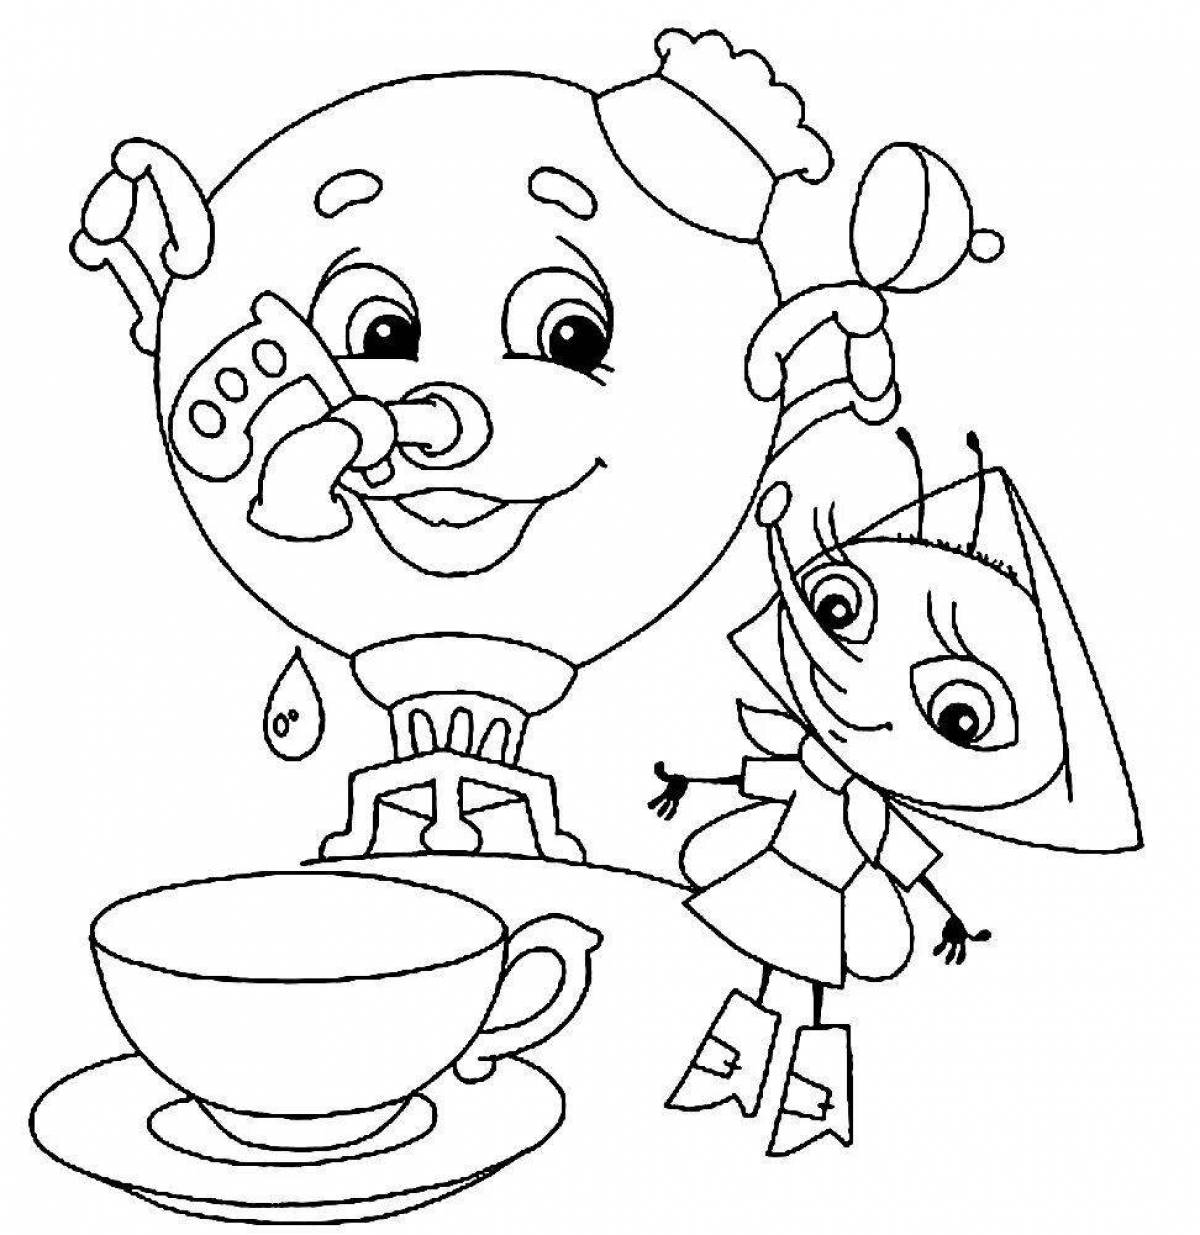 Coloring book glowing samovar for children